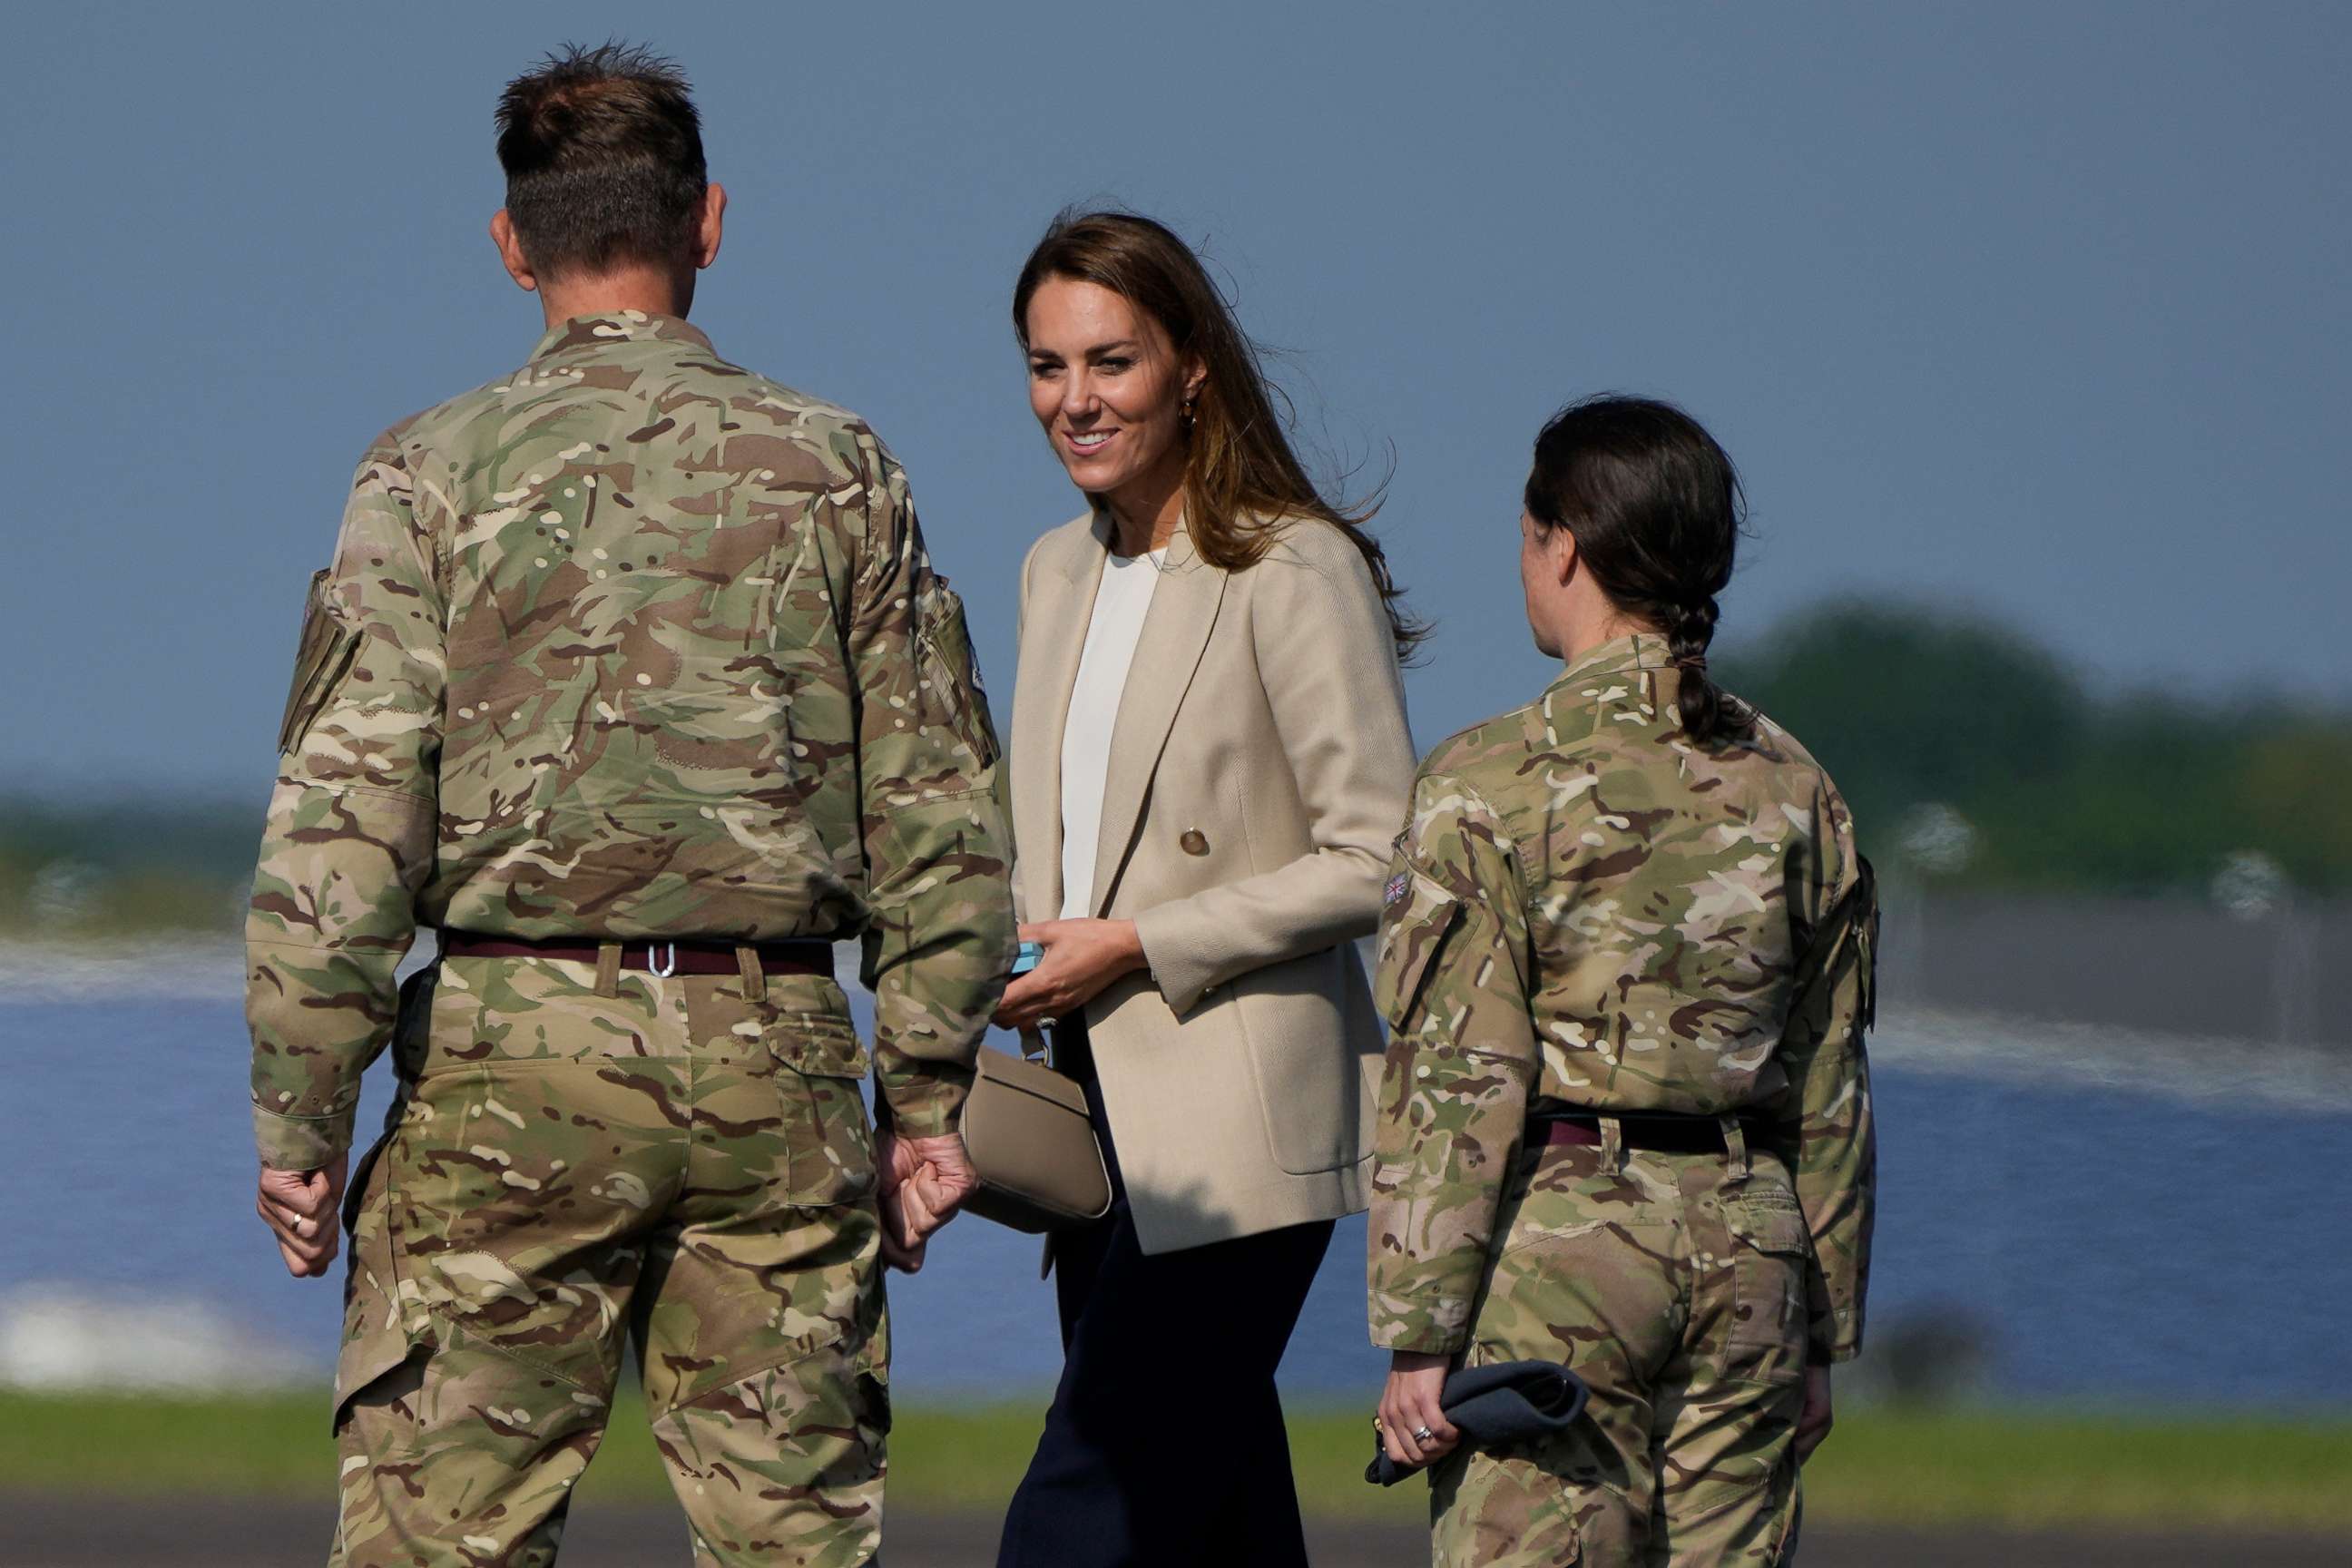 PHOTO: Britain's Kate, The Duchess of Cambridge meets military personnel during a visit to RAF Brize Norton in Oxfordshire, England, Sept. 15, 2021.